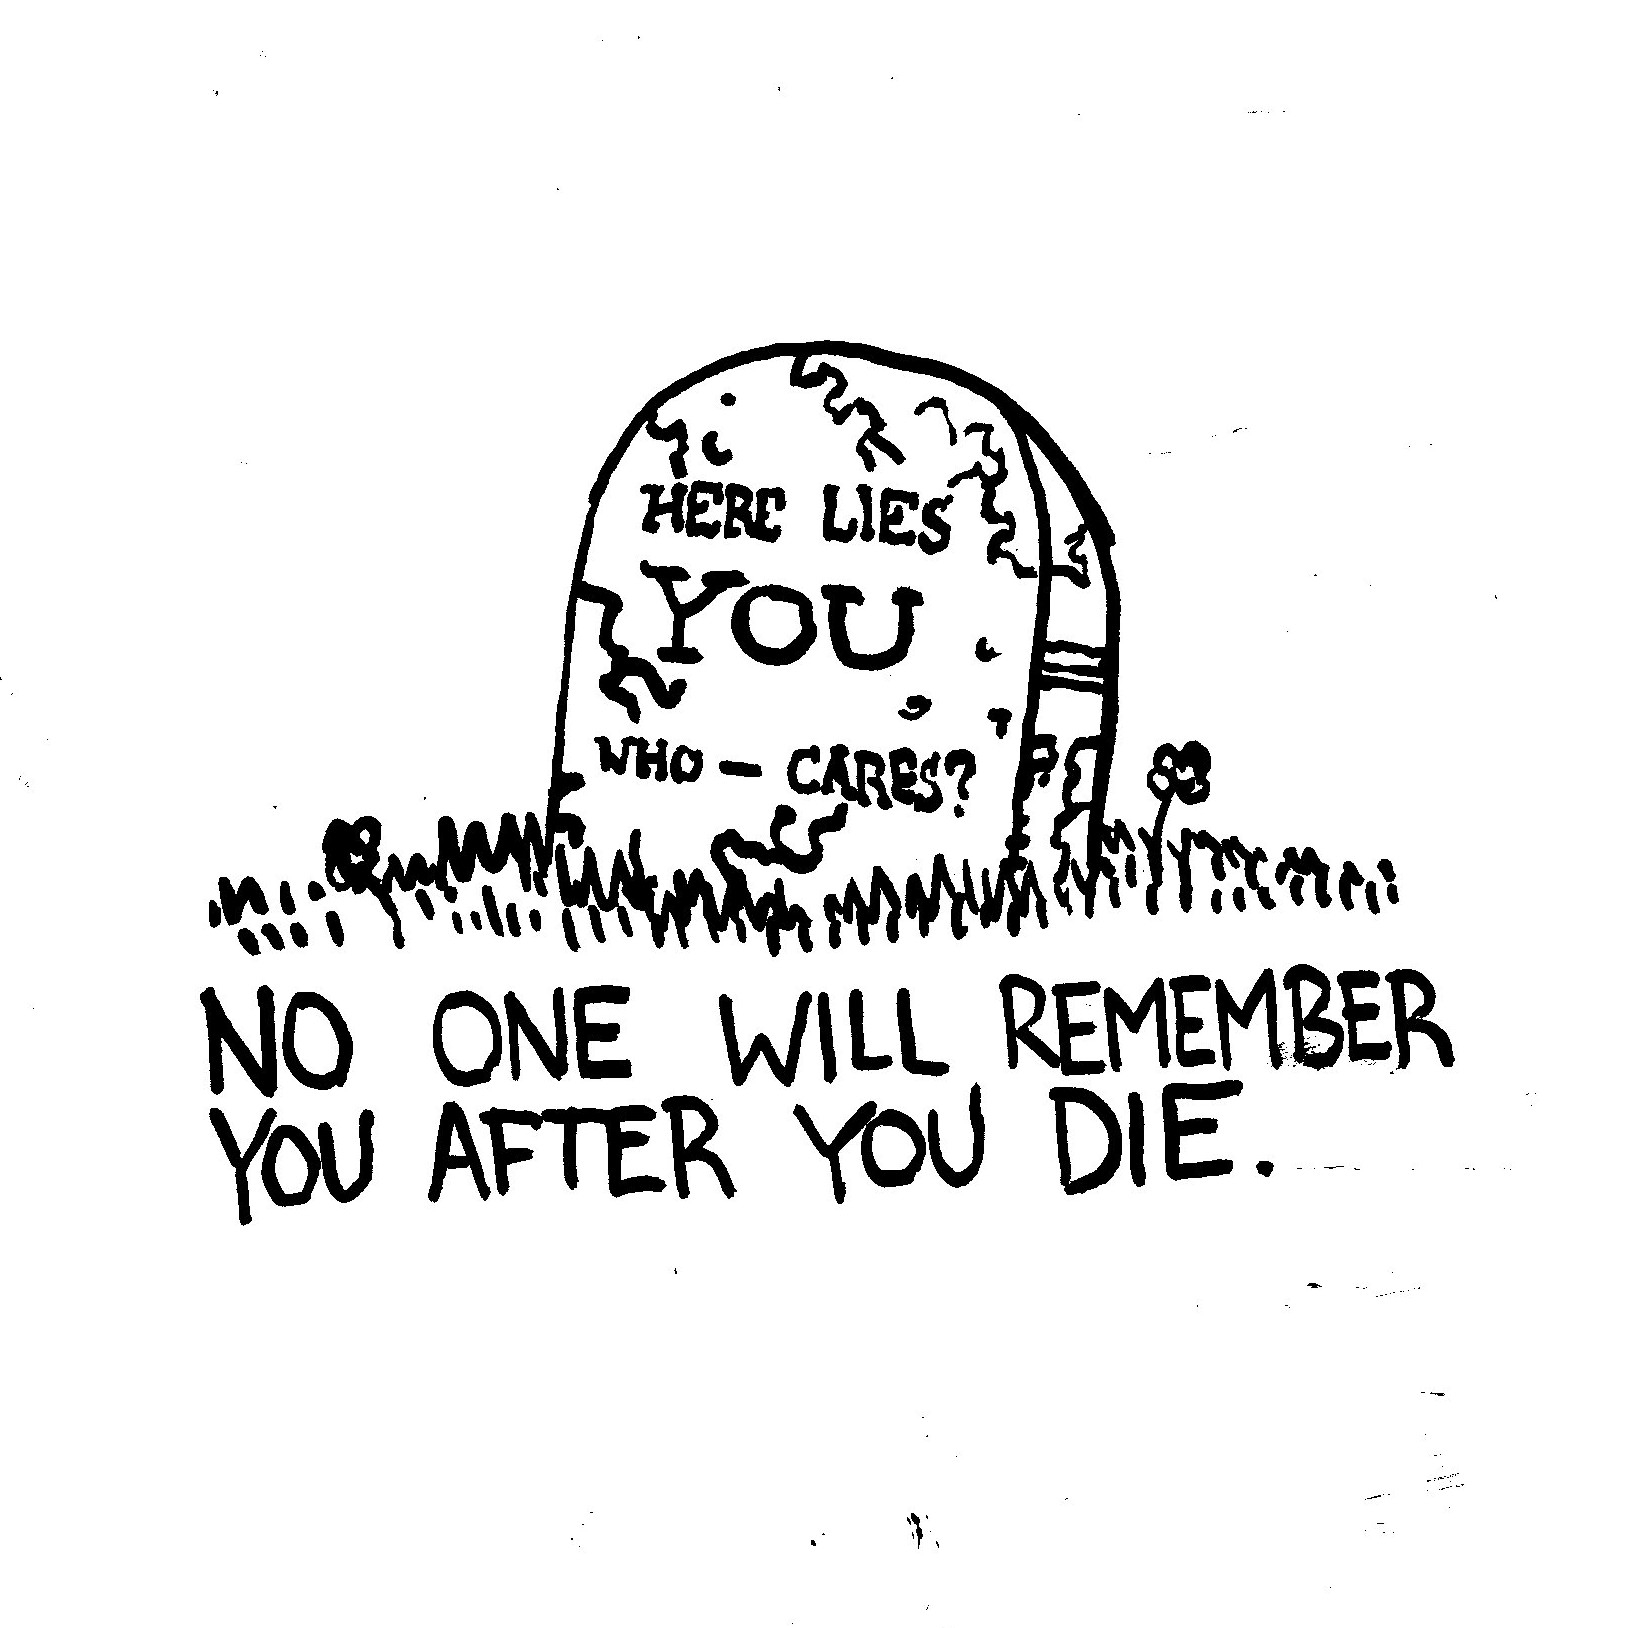 No one will remember you after you die.